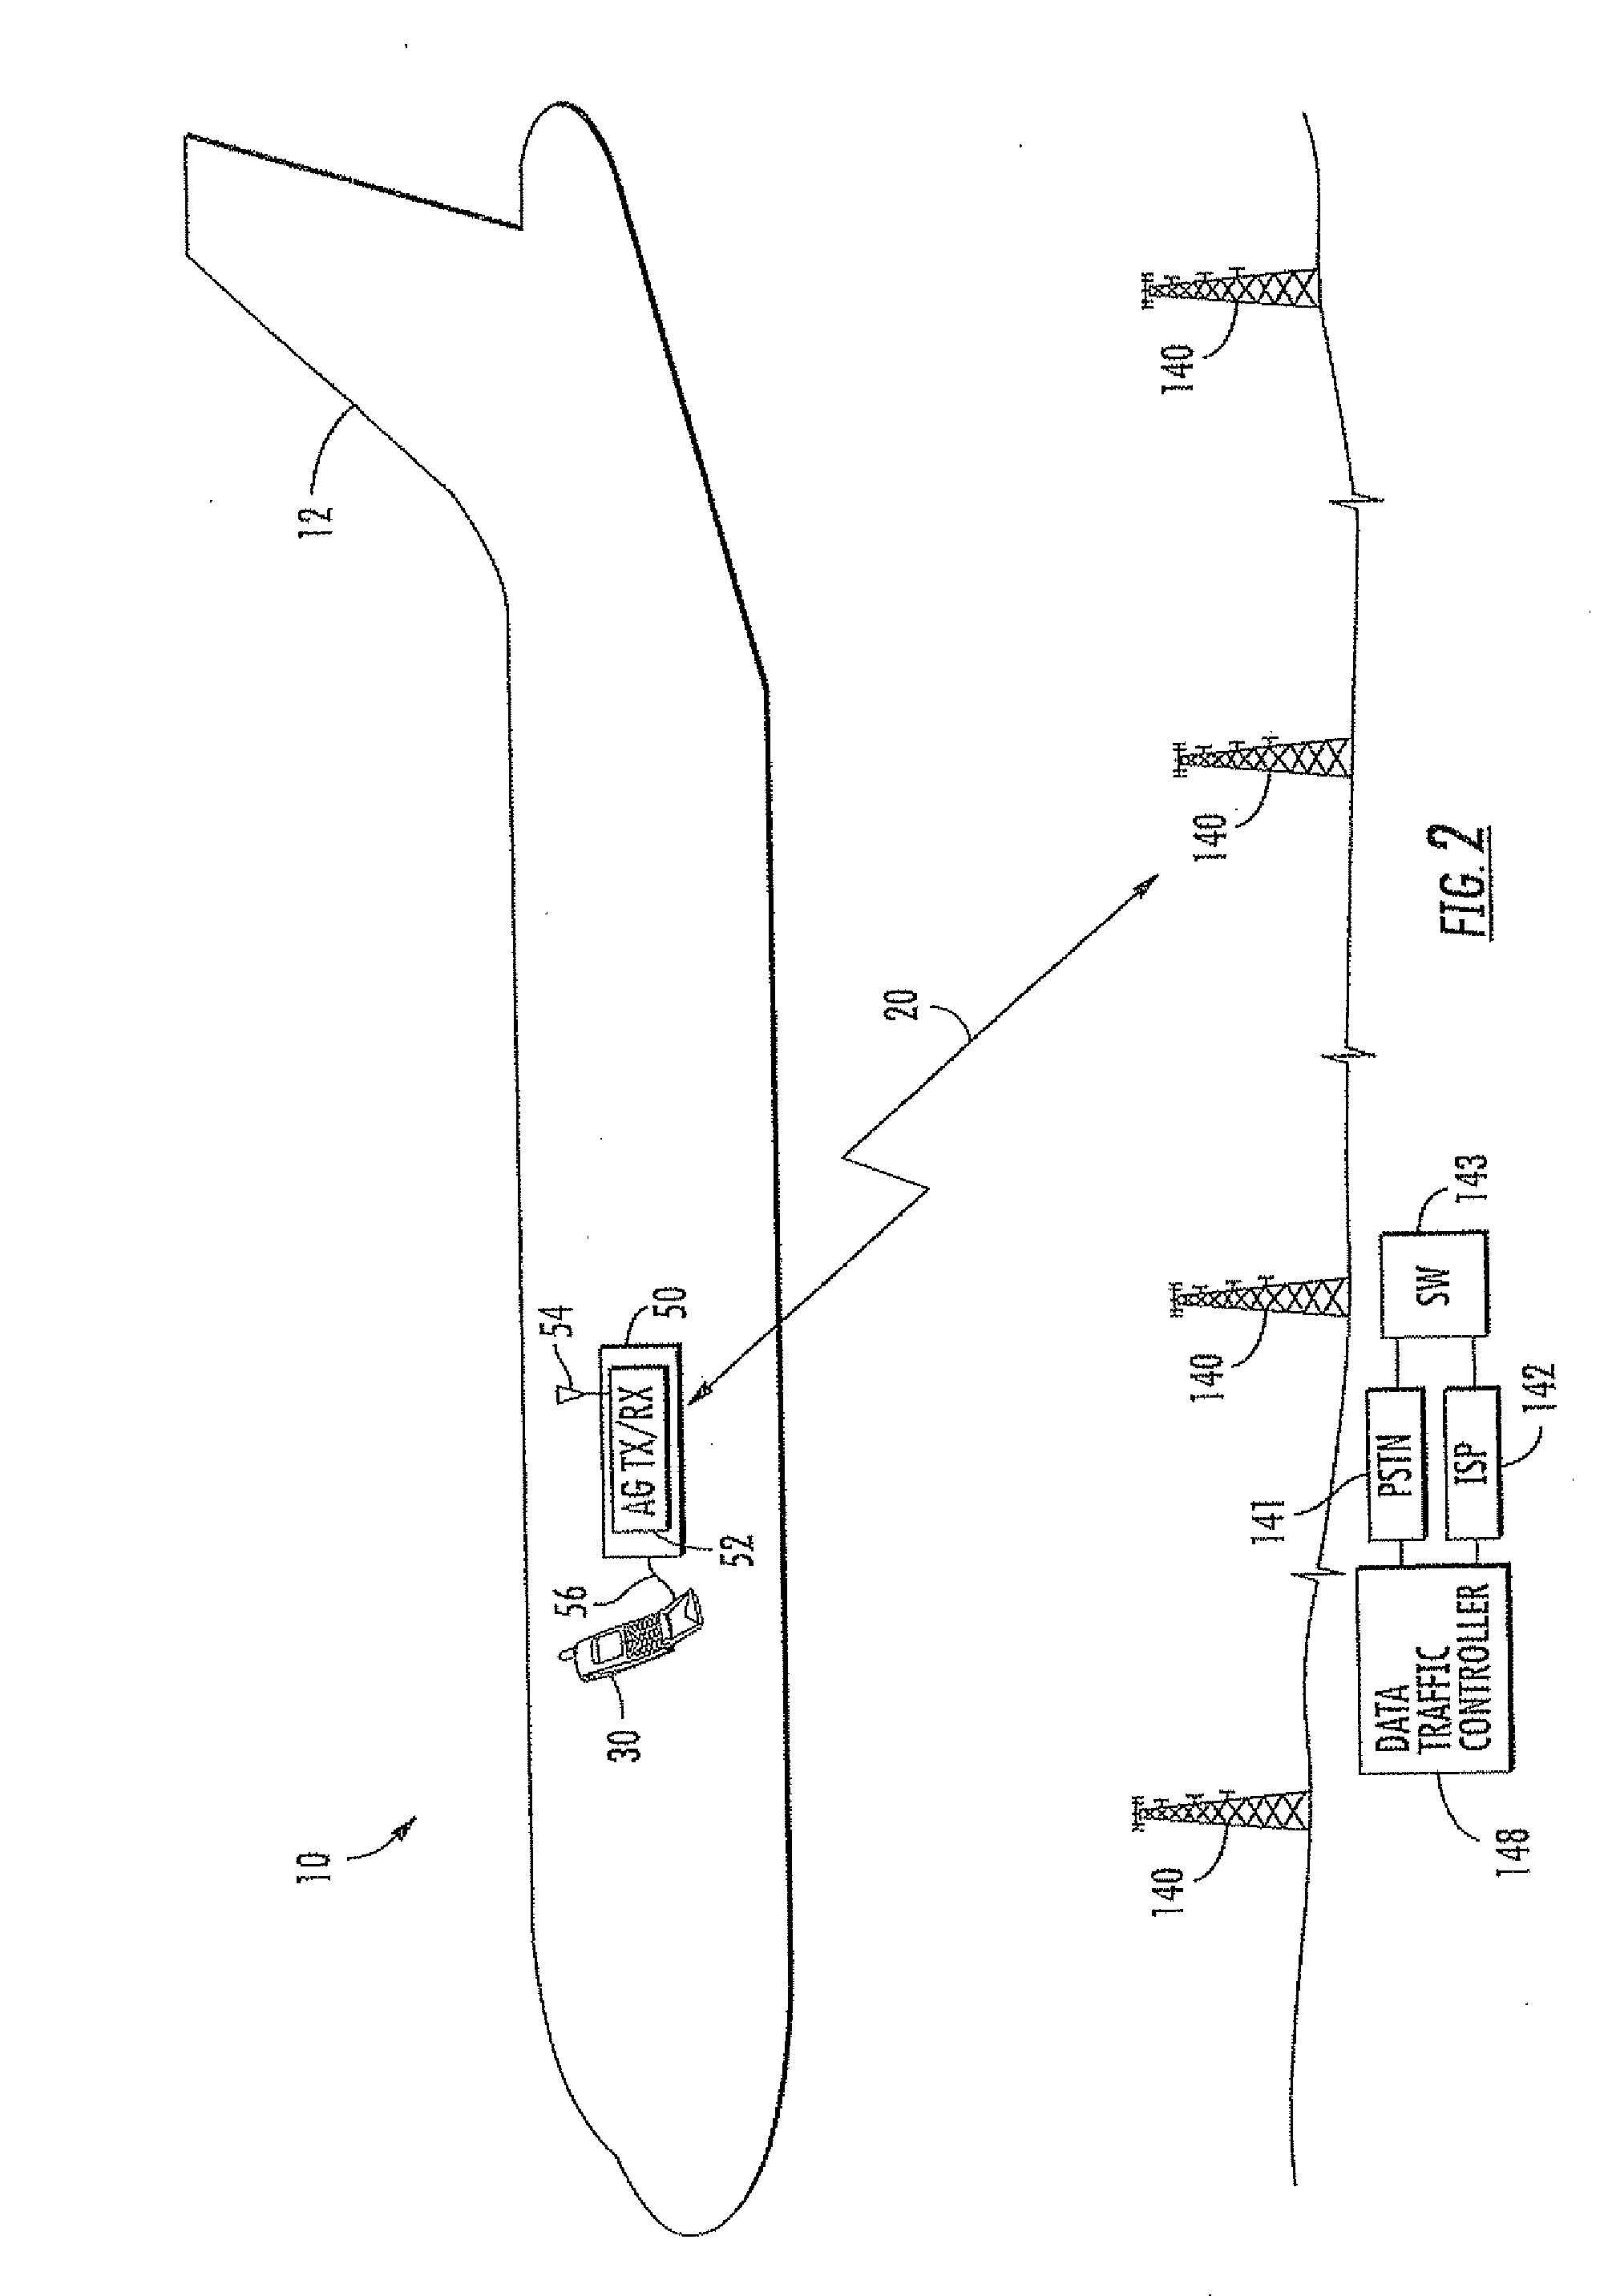 Aircraft communications system using whitelists to control access and associated methods